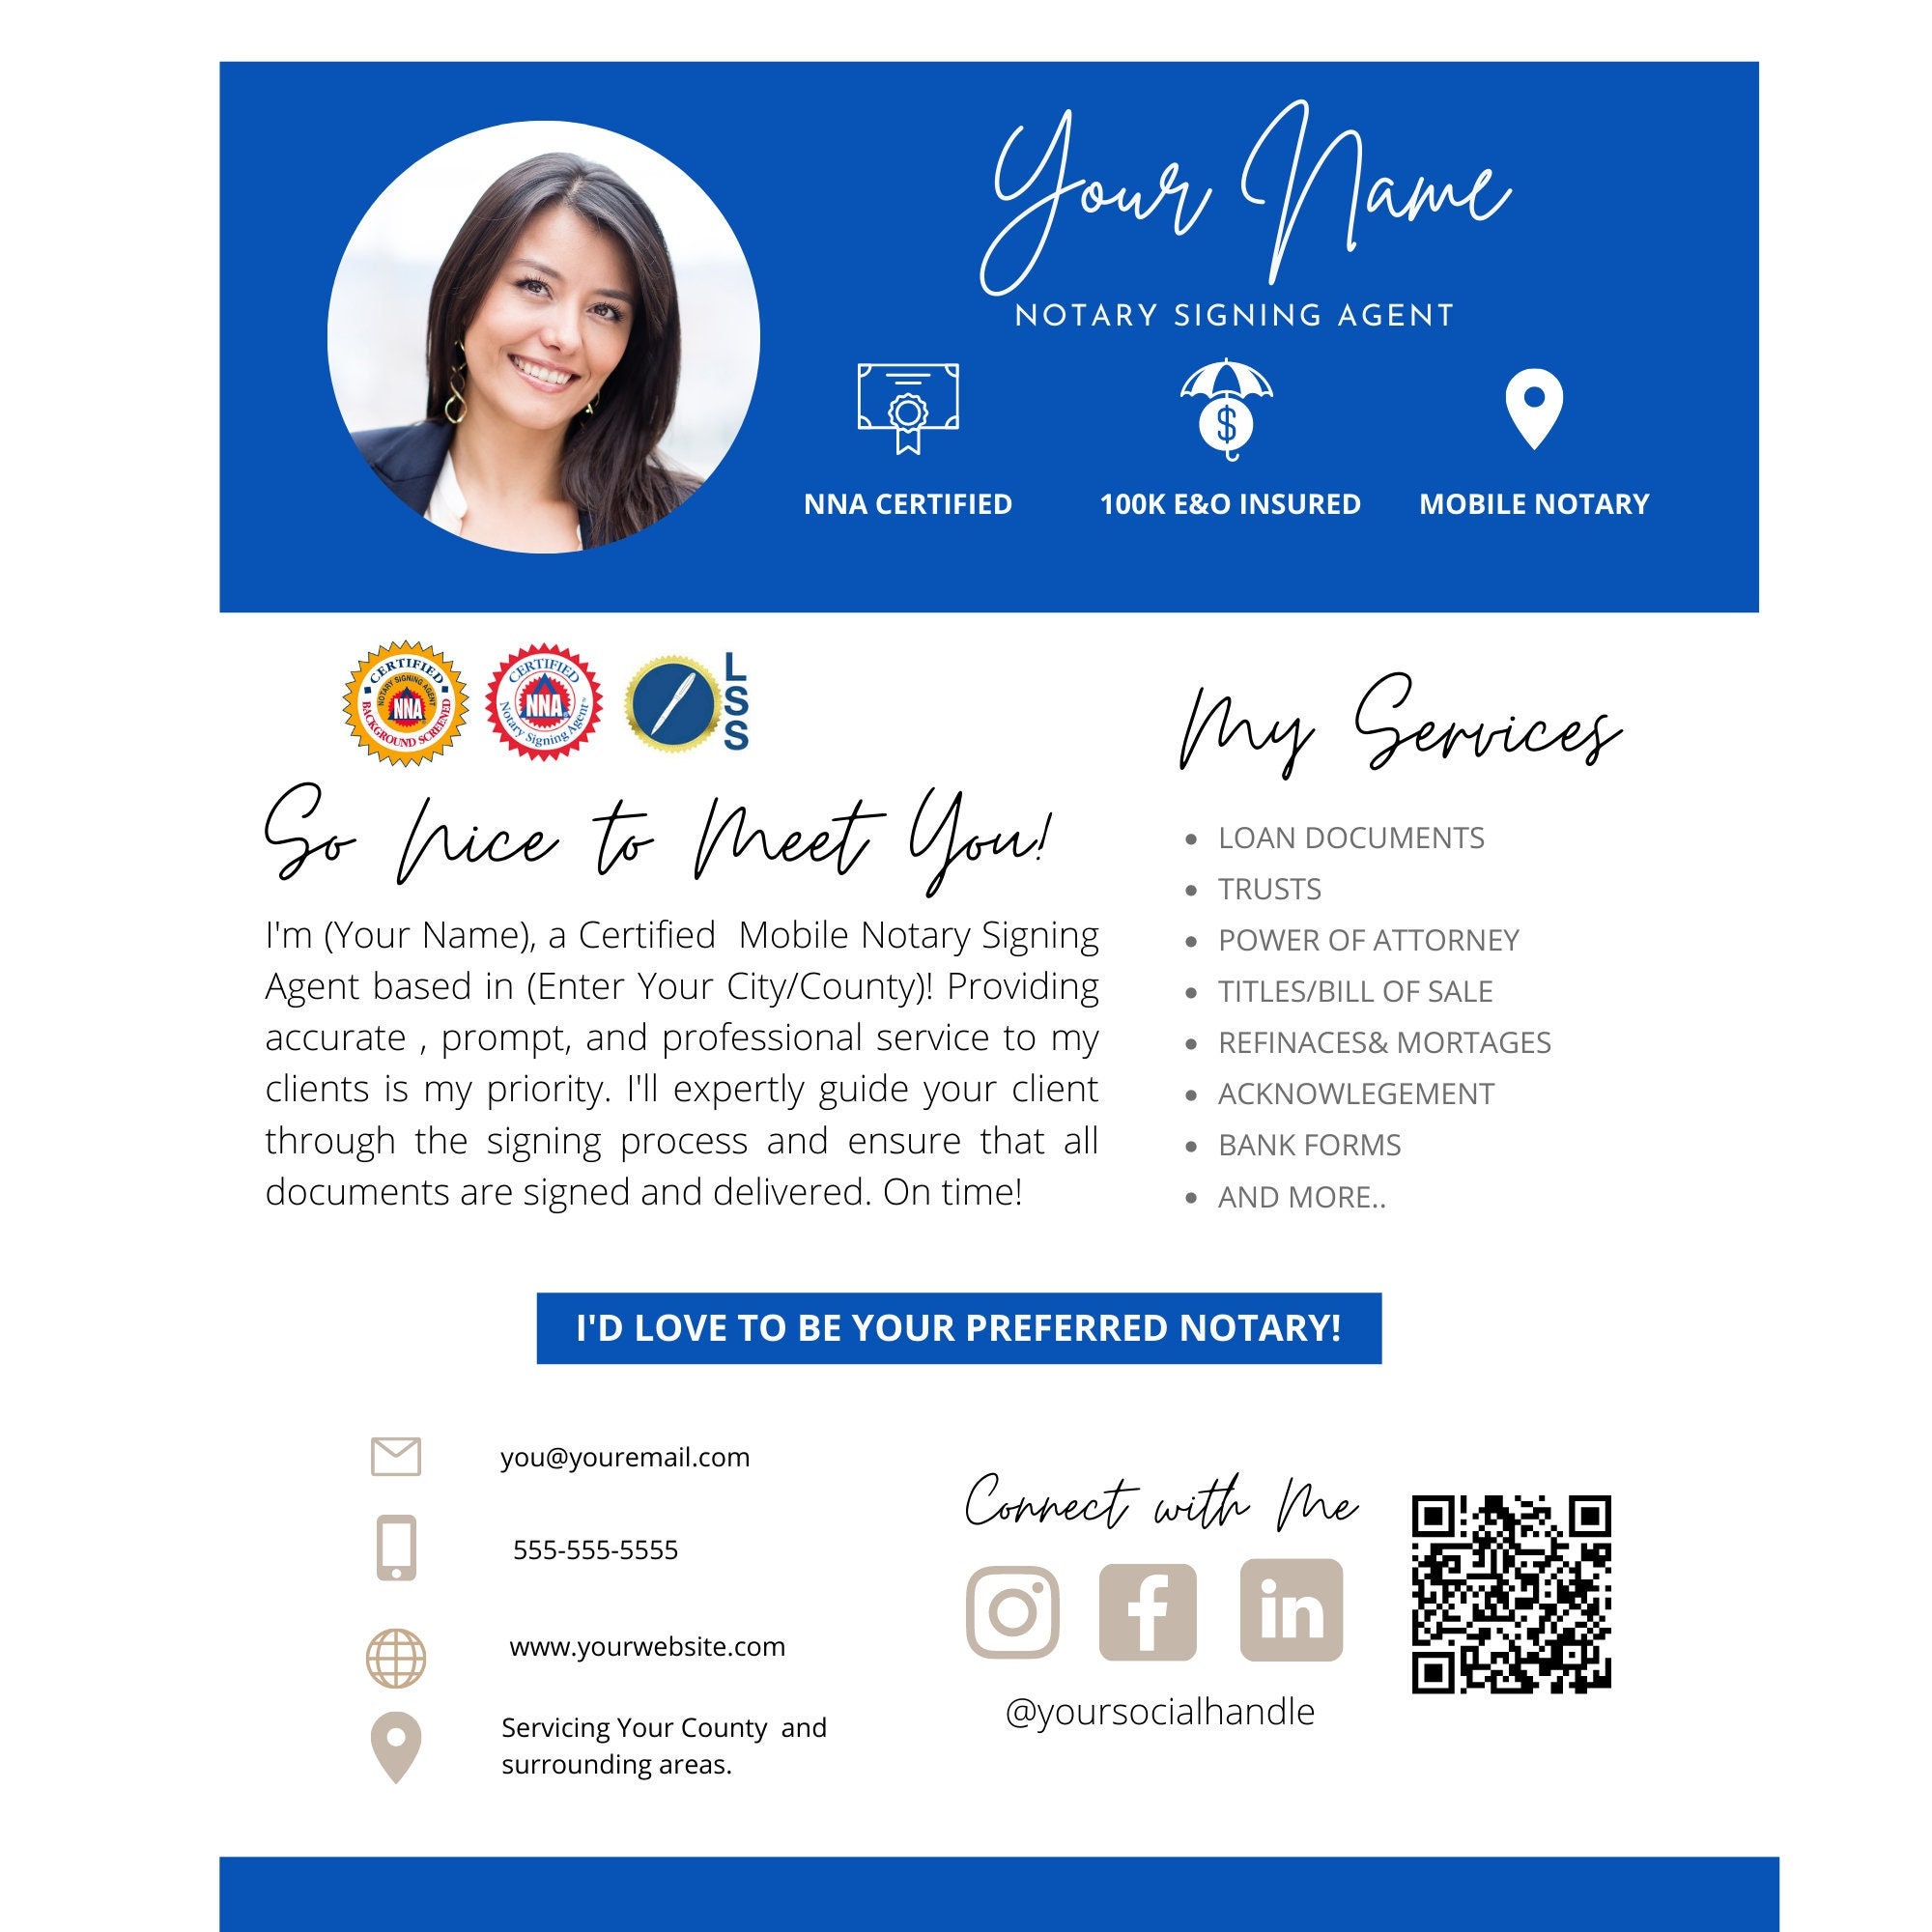 DIY Flyer Template canva Template for Notary Signing Agents, Marketing ...